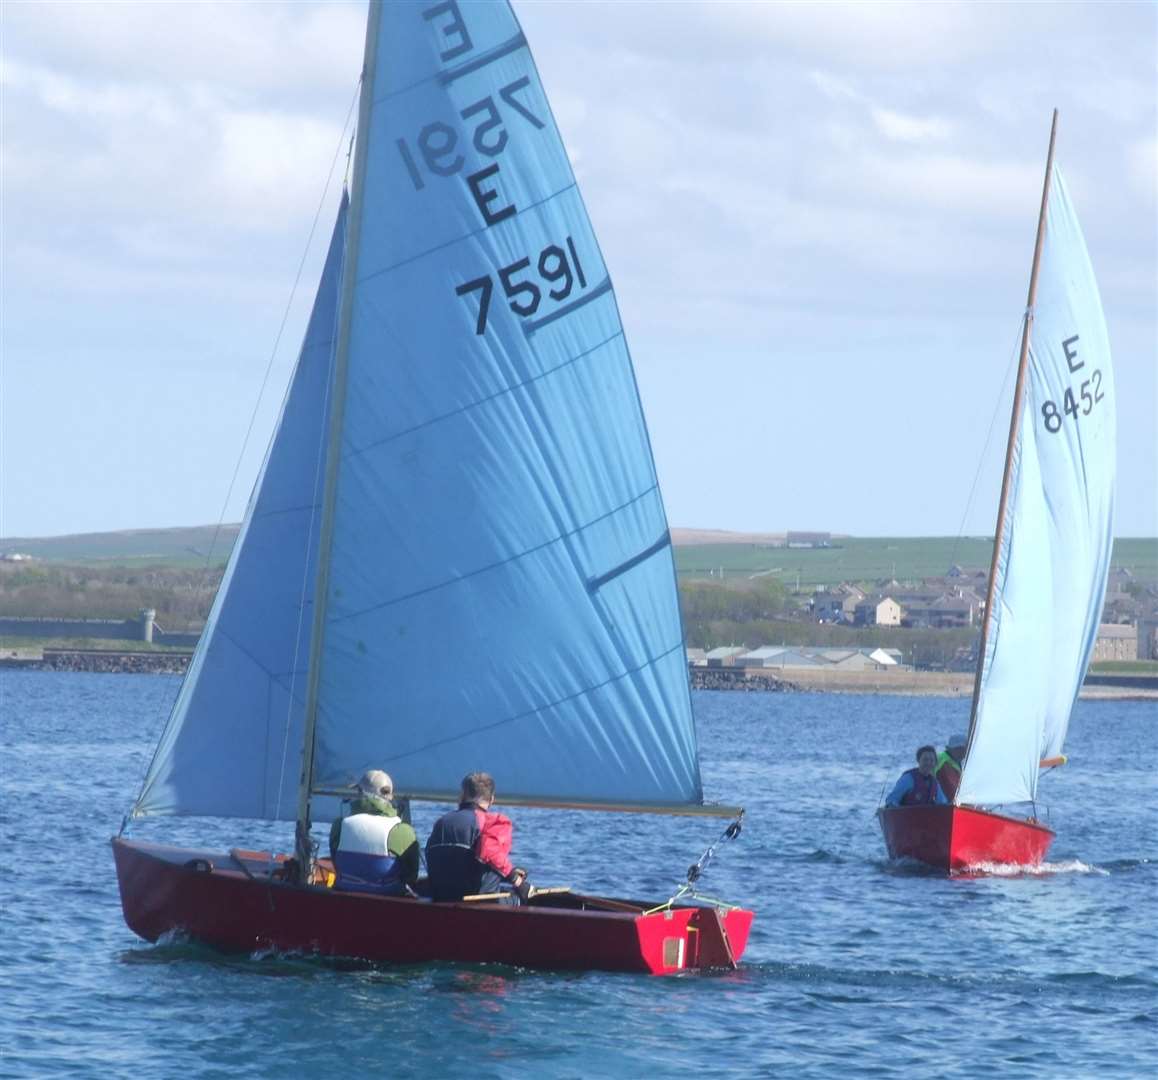 The two Enterprise dinghies, each with a newcomer and experienced sailor on board.